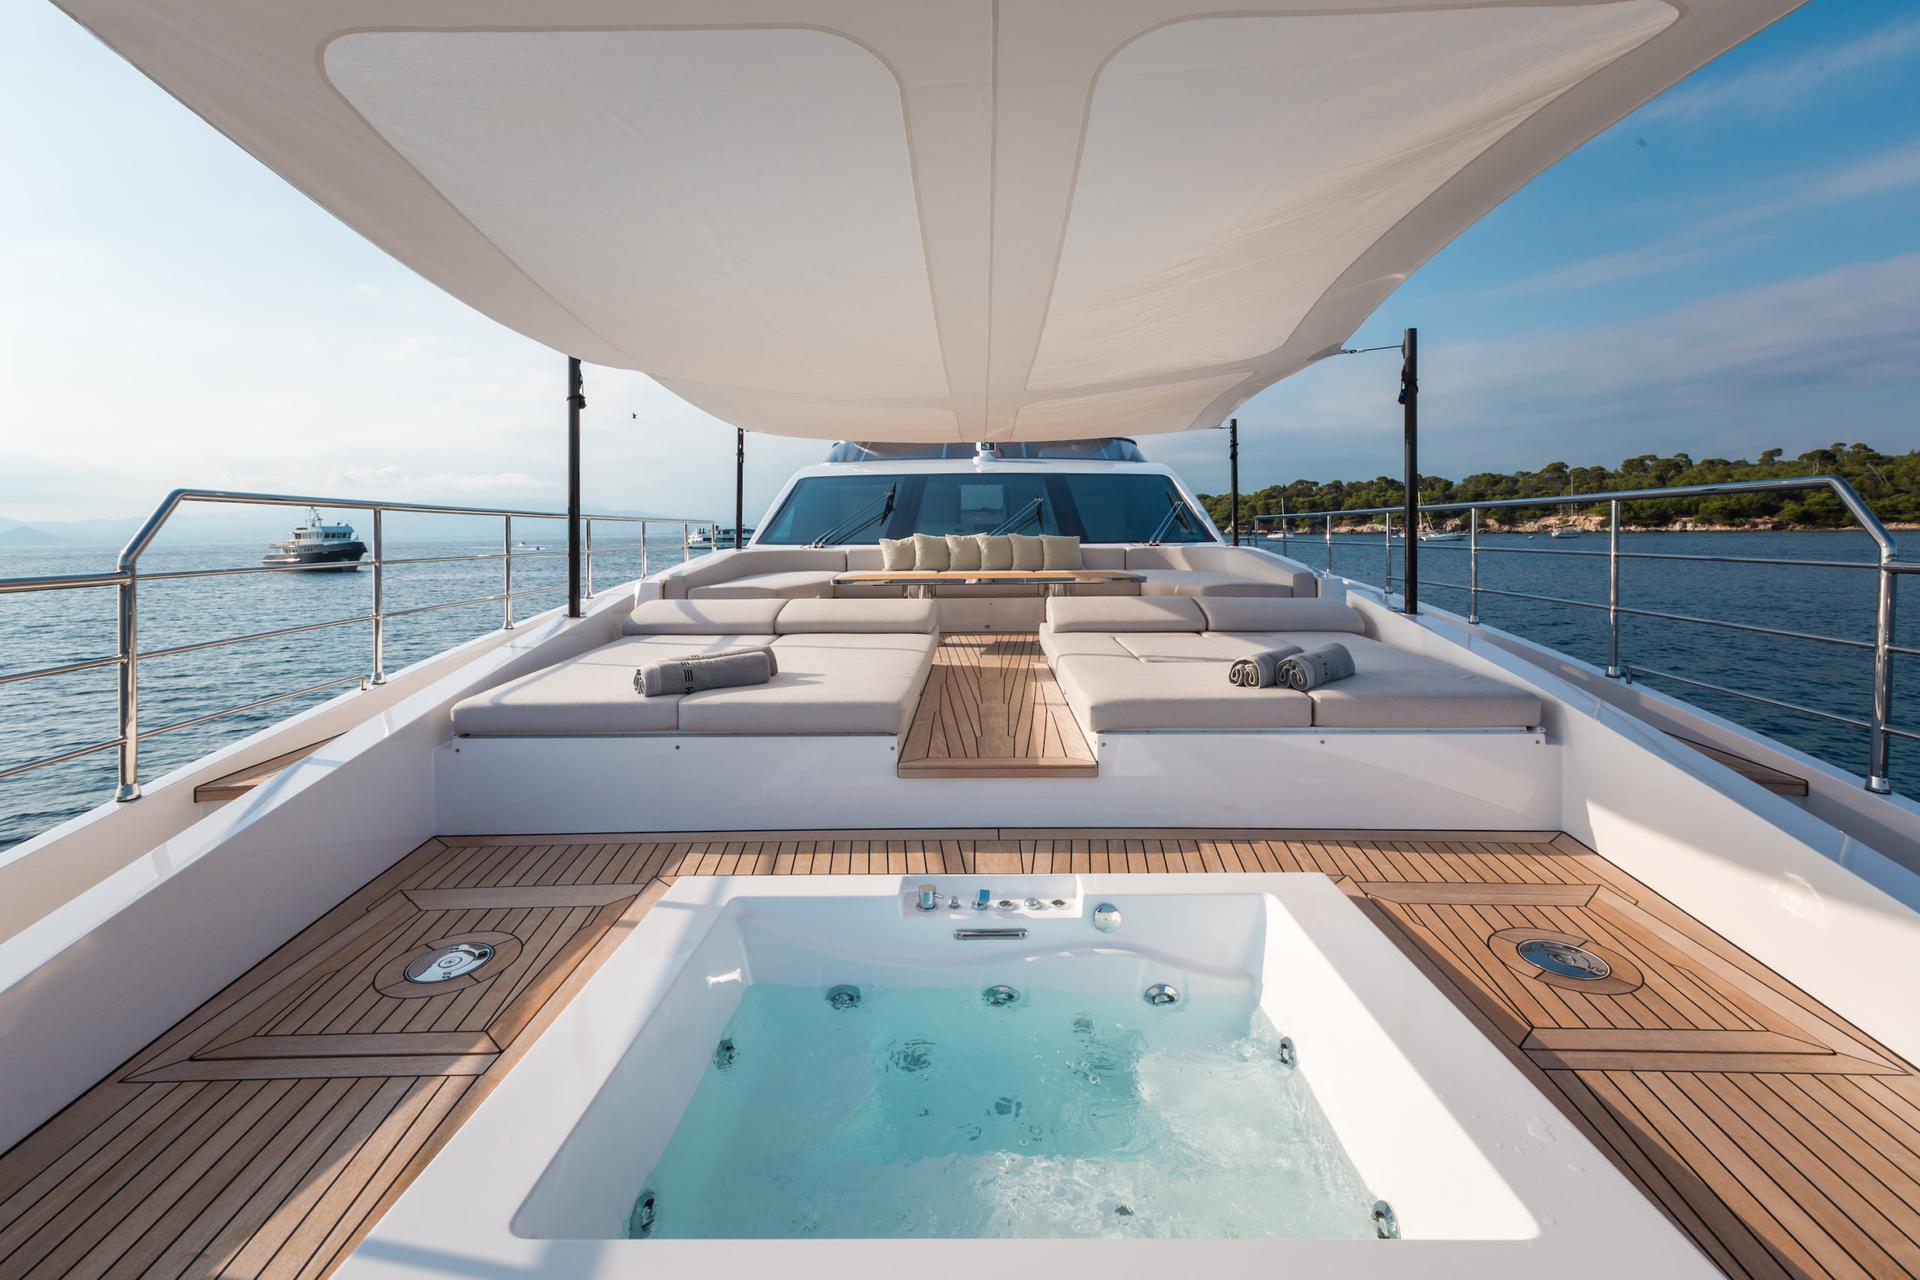 Heed motor super yacht charter luxury outdoor jacuzzi - High Point Yachting